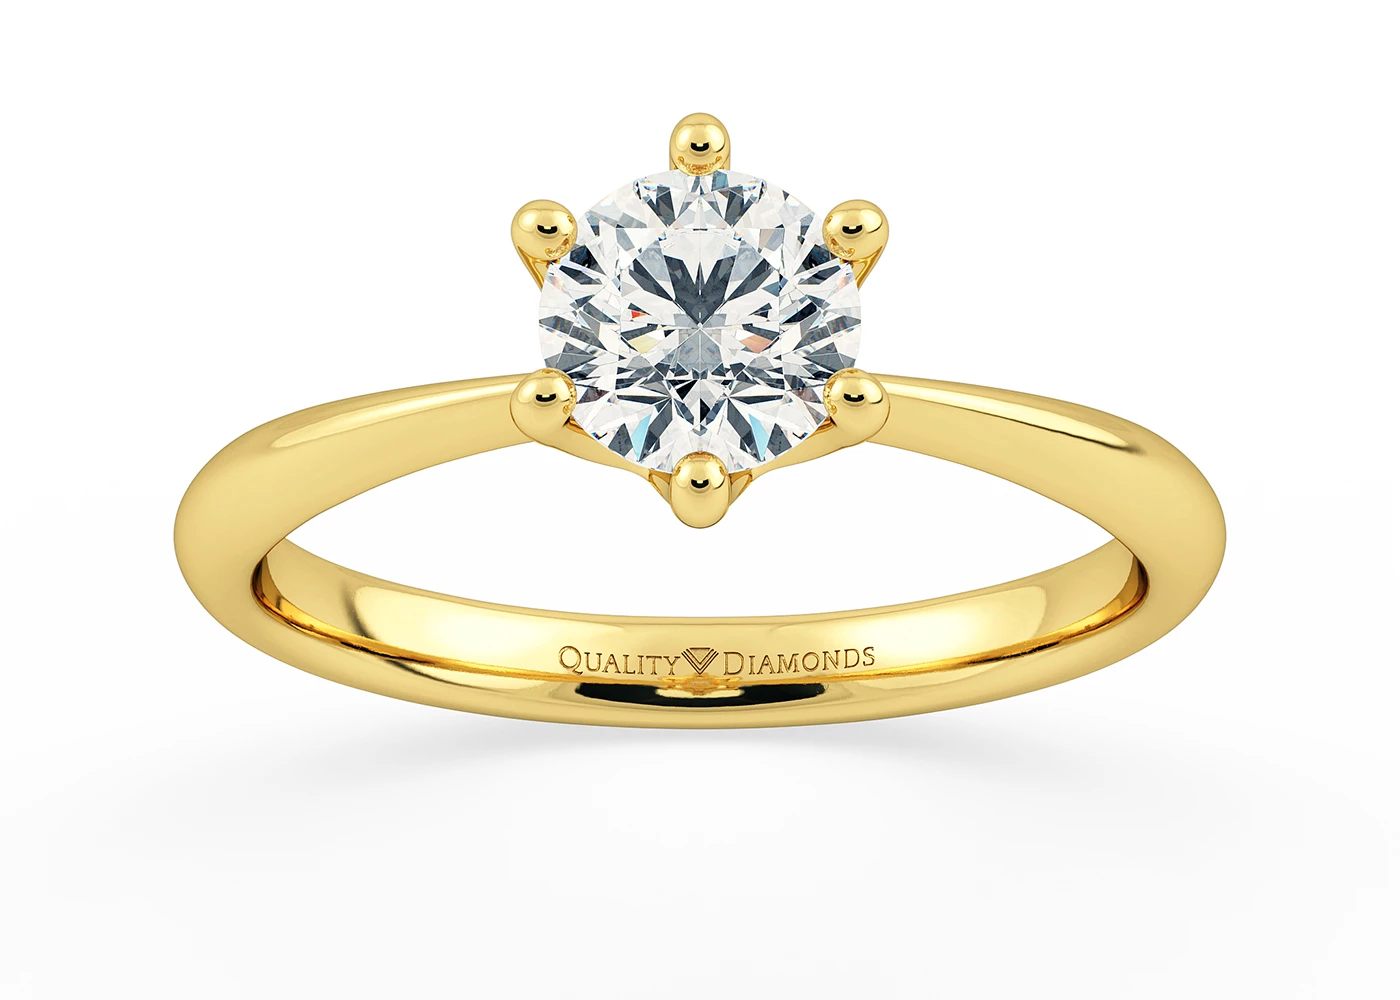 Six Claw Round Brilliant Amorette Diamond Ring in 9K Yellow Gold